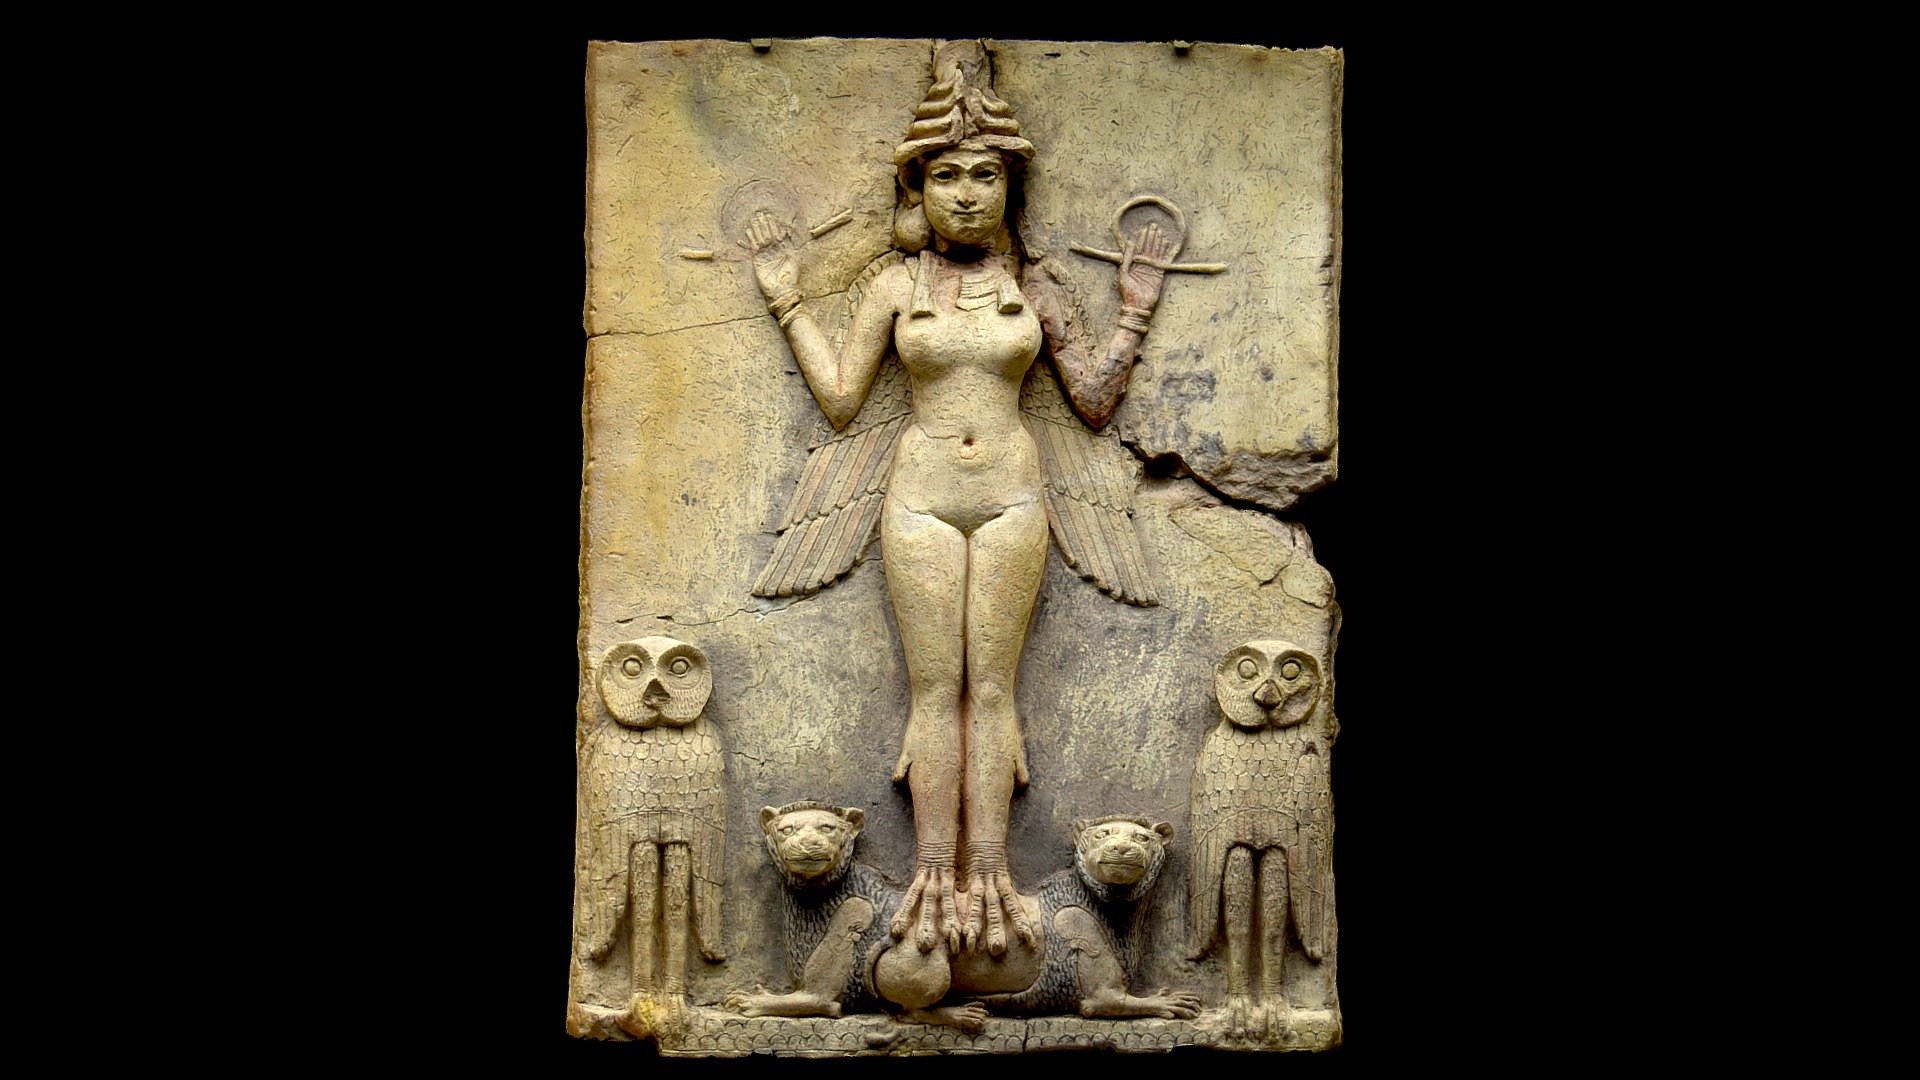 A plaque made of baked straw-tempered clay featuring a winged Babylonian goddess. It was found in southern Iraq and brought to the British Museum (BM) in 1933. It was named the “Burney Relief” after its owner, the London antique dealer Sidney Burney. Authenticity was in doubt for many years but thermoluminescence tests confirm the plaque was made between 1765 and 45 BC, thus slotted into the Old Babylonian period 1800–1750 BC. Plaque was then purchased by the BM in 2003. 

There is a great debate about who is depicted as the plaque was renamed “the Queen of the Night”. For years argued to be baby-stealing demon Lilitu, but now Ishtar is now the accepted interpretation.

Photos from testing my Nikon D5500. Uploaded on Walpurgisnacht 2020 3d model